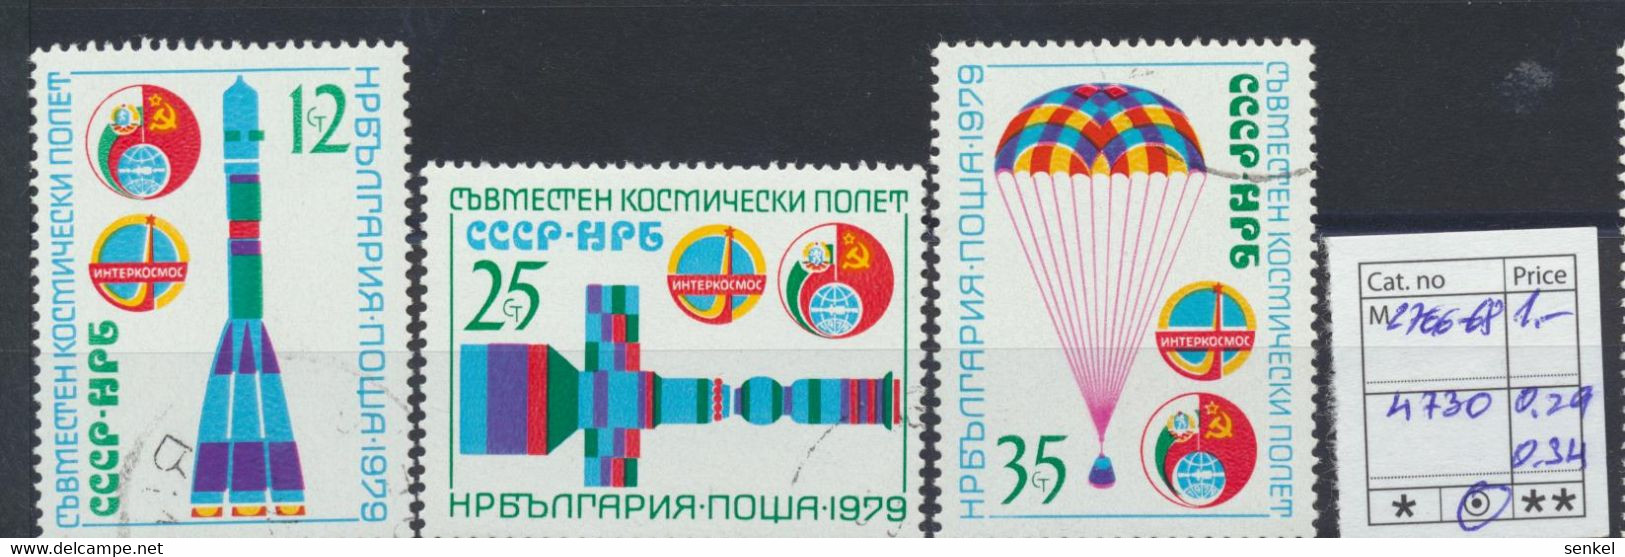 4722 - 4742 Bulgaria 1979 different stamps exhibition cosmos post humour Gabrovo art Dürer towers